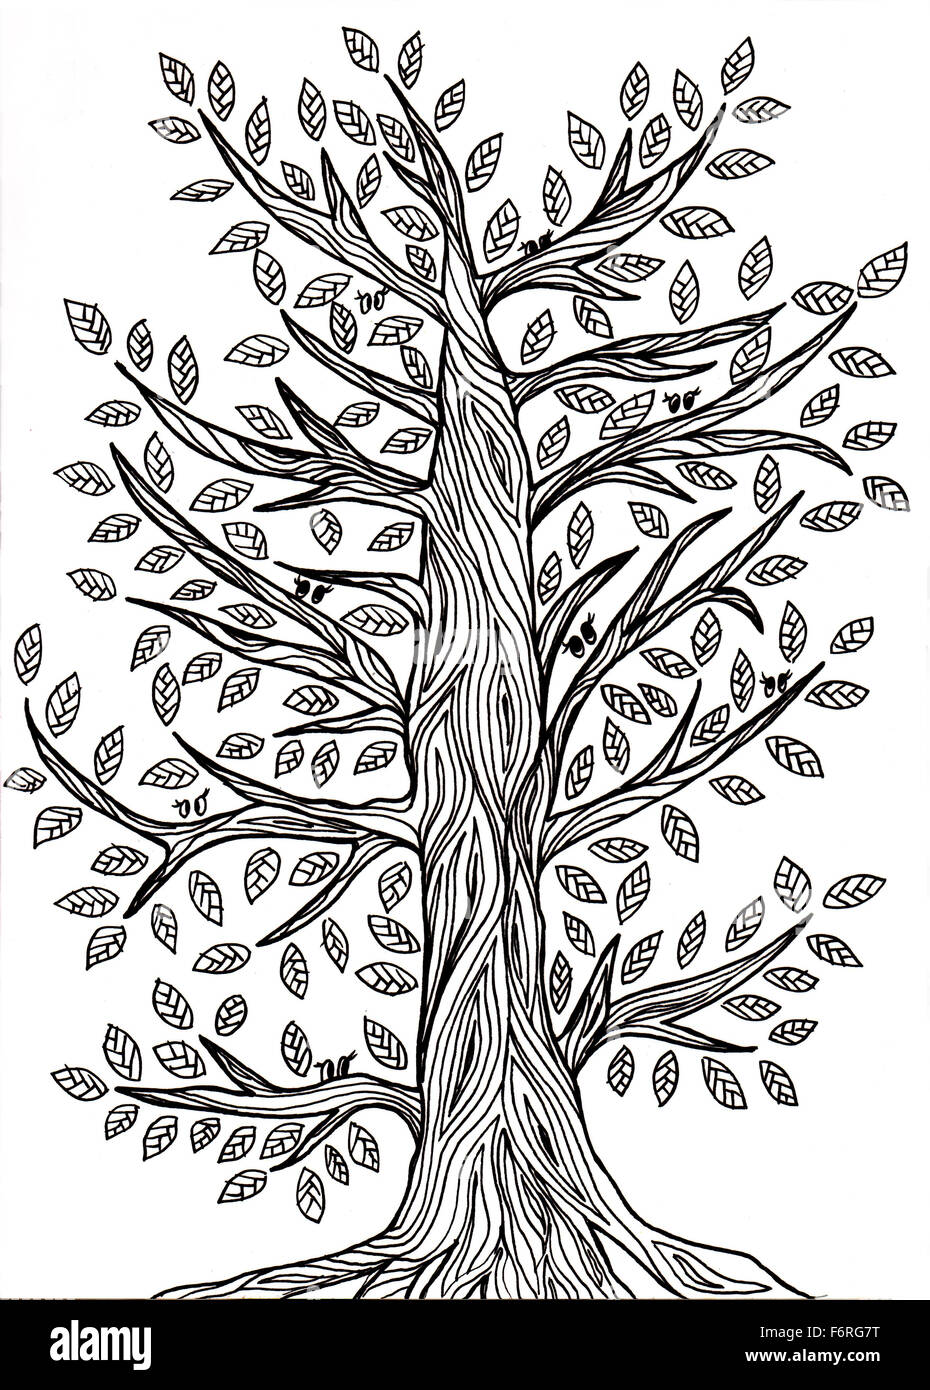 Handmade graphic drawing of a tree with leaves Stock Photo